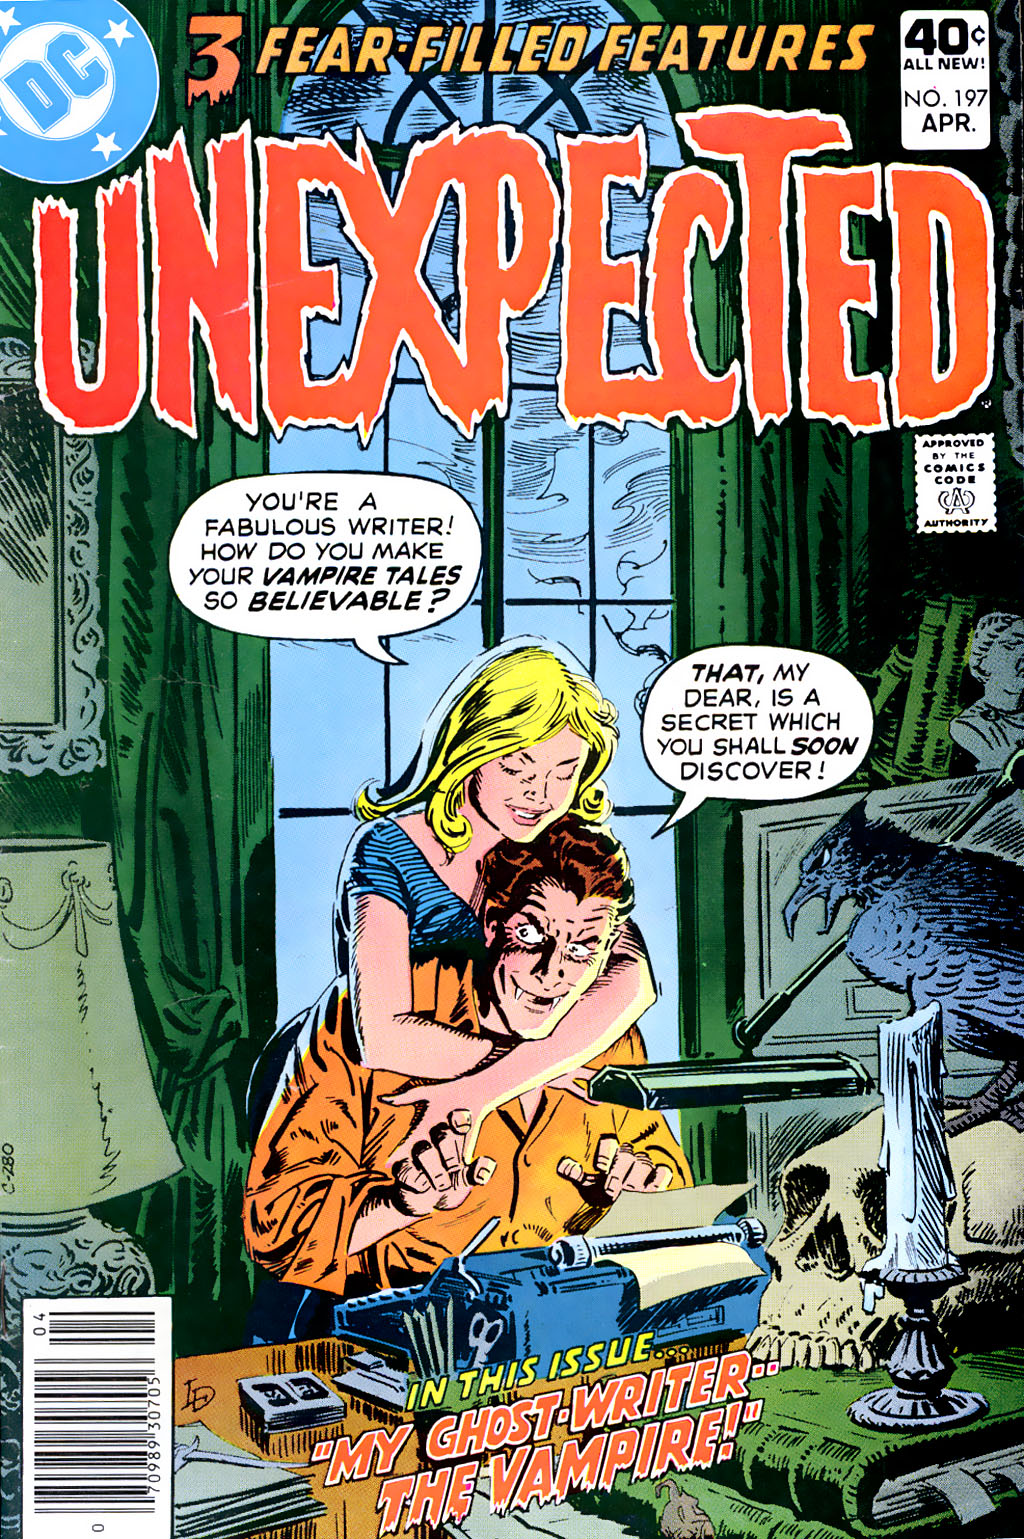 Read online Tales of the Unexpected comic -  Issue #197 - 1